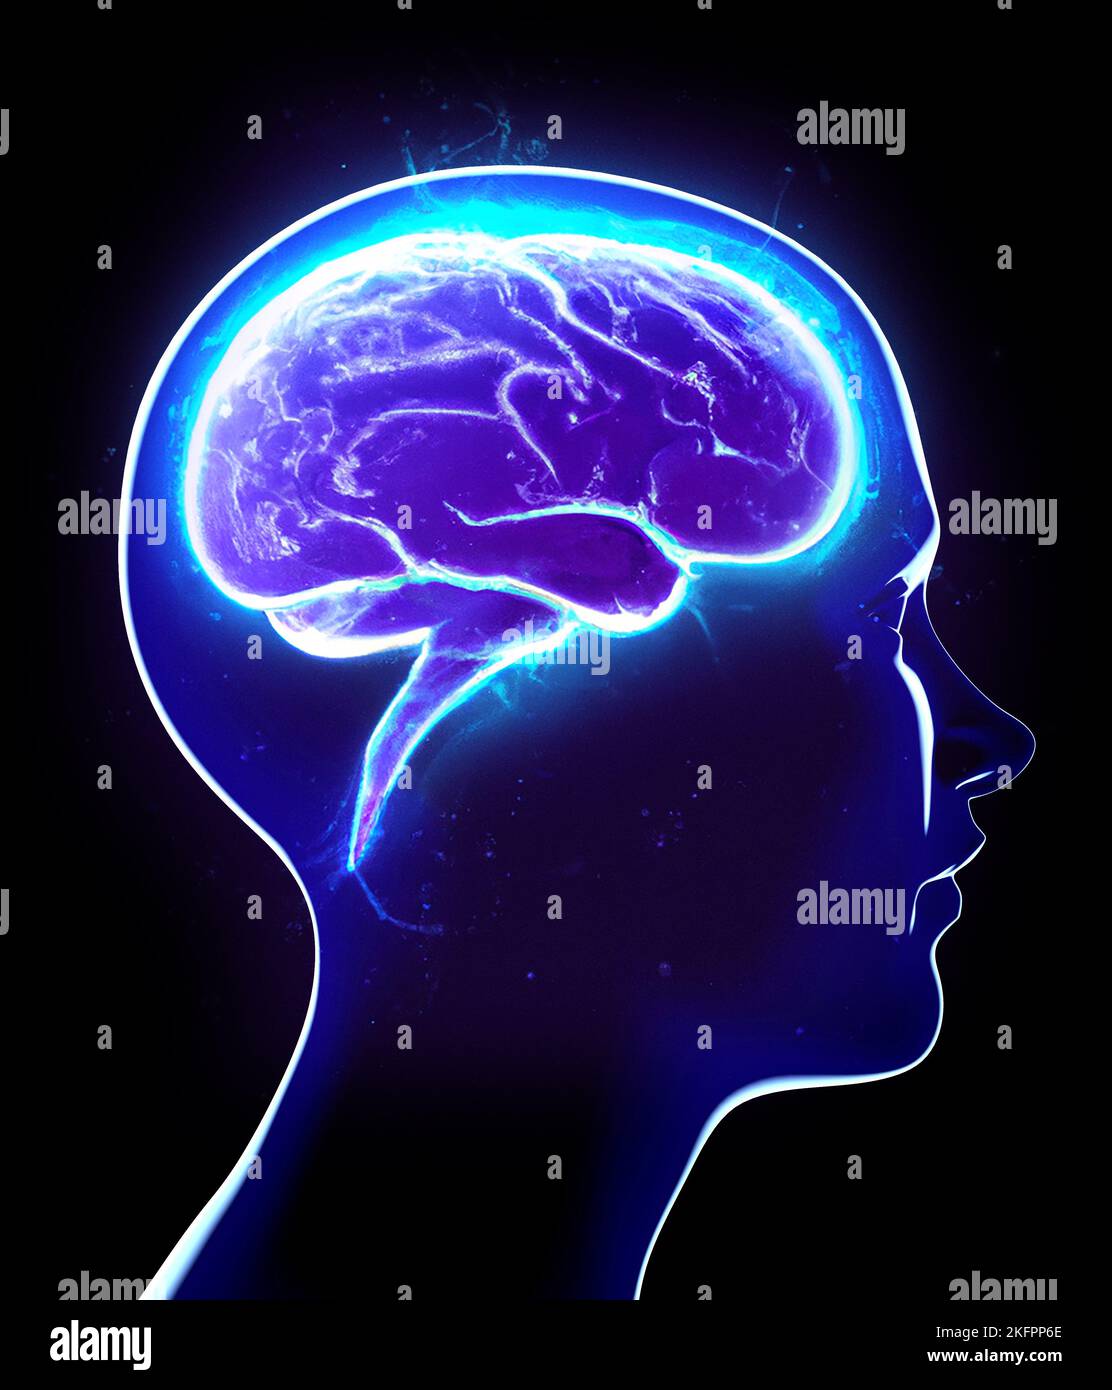 Neurology, philosophy: connections, the development of thought and reflection, the infinite possibilities of the brain and mind. Human anatomy face Stock Photo